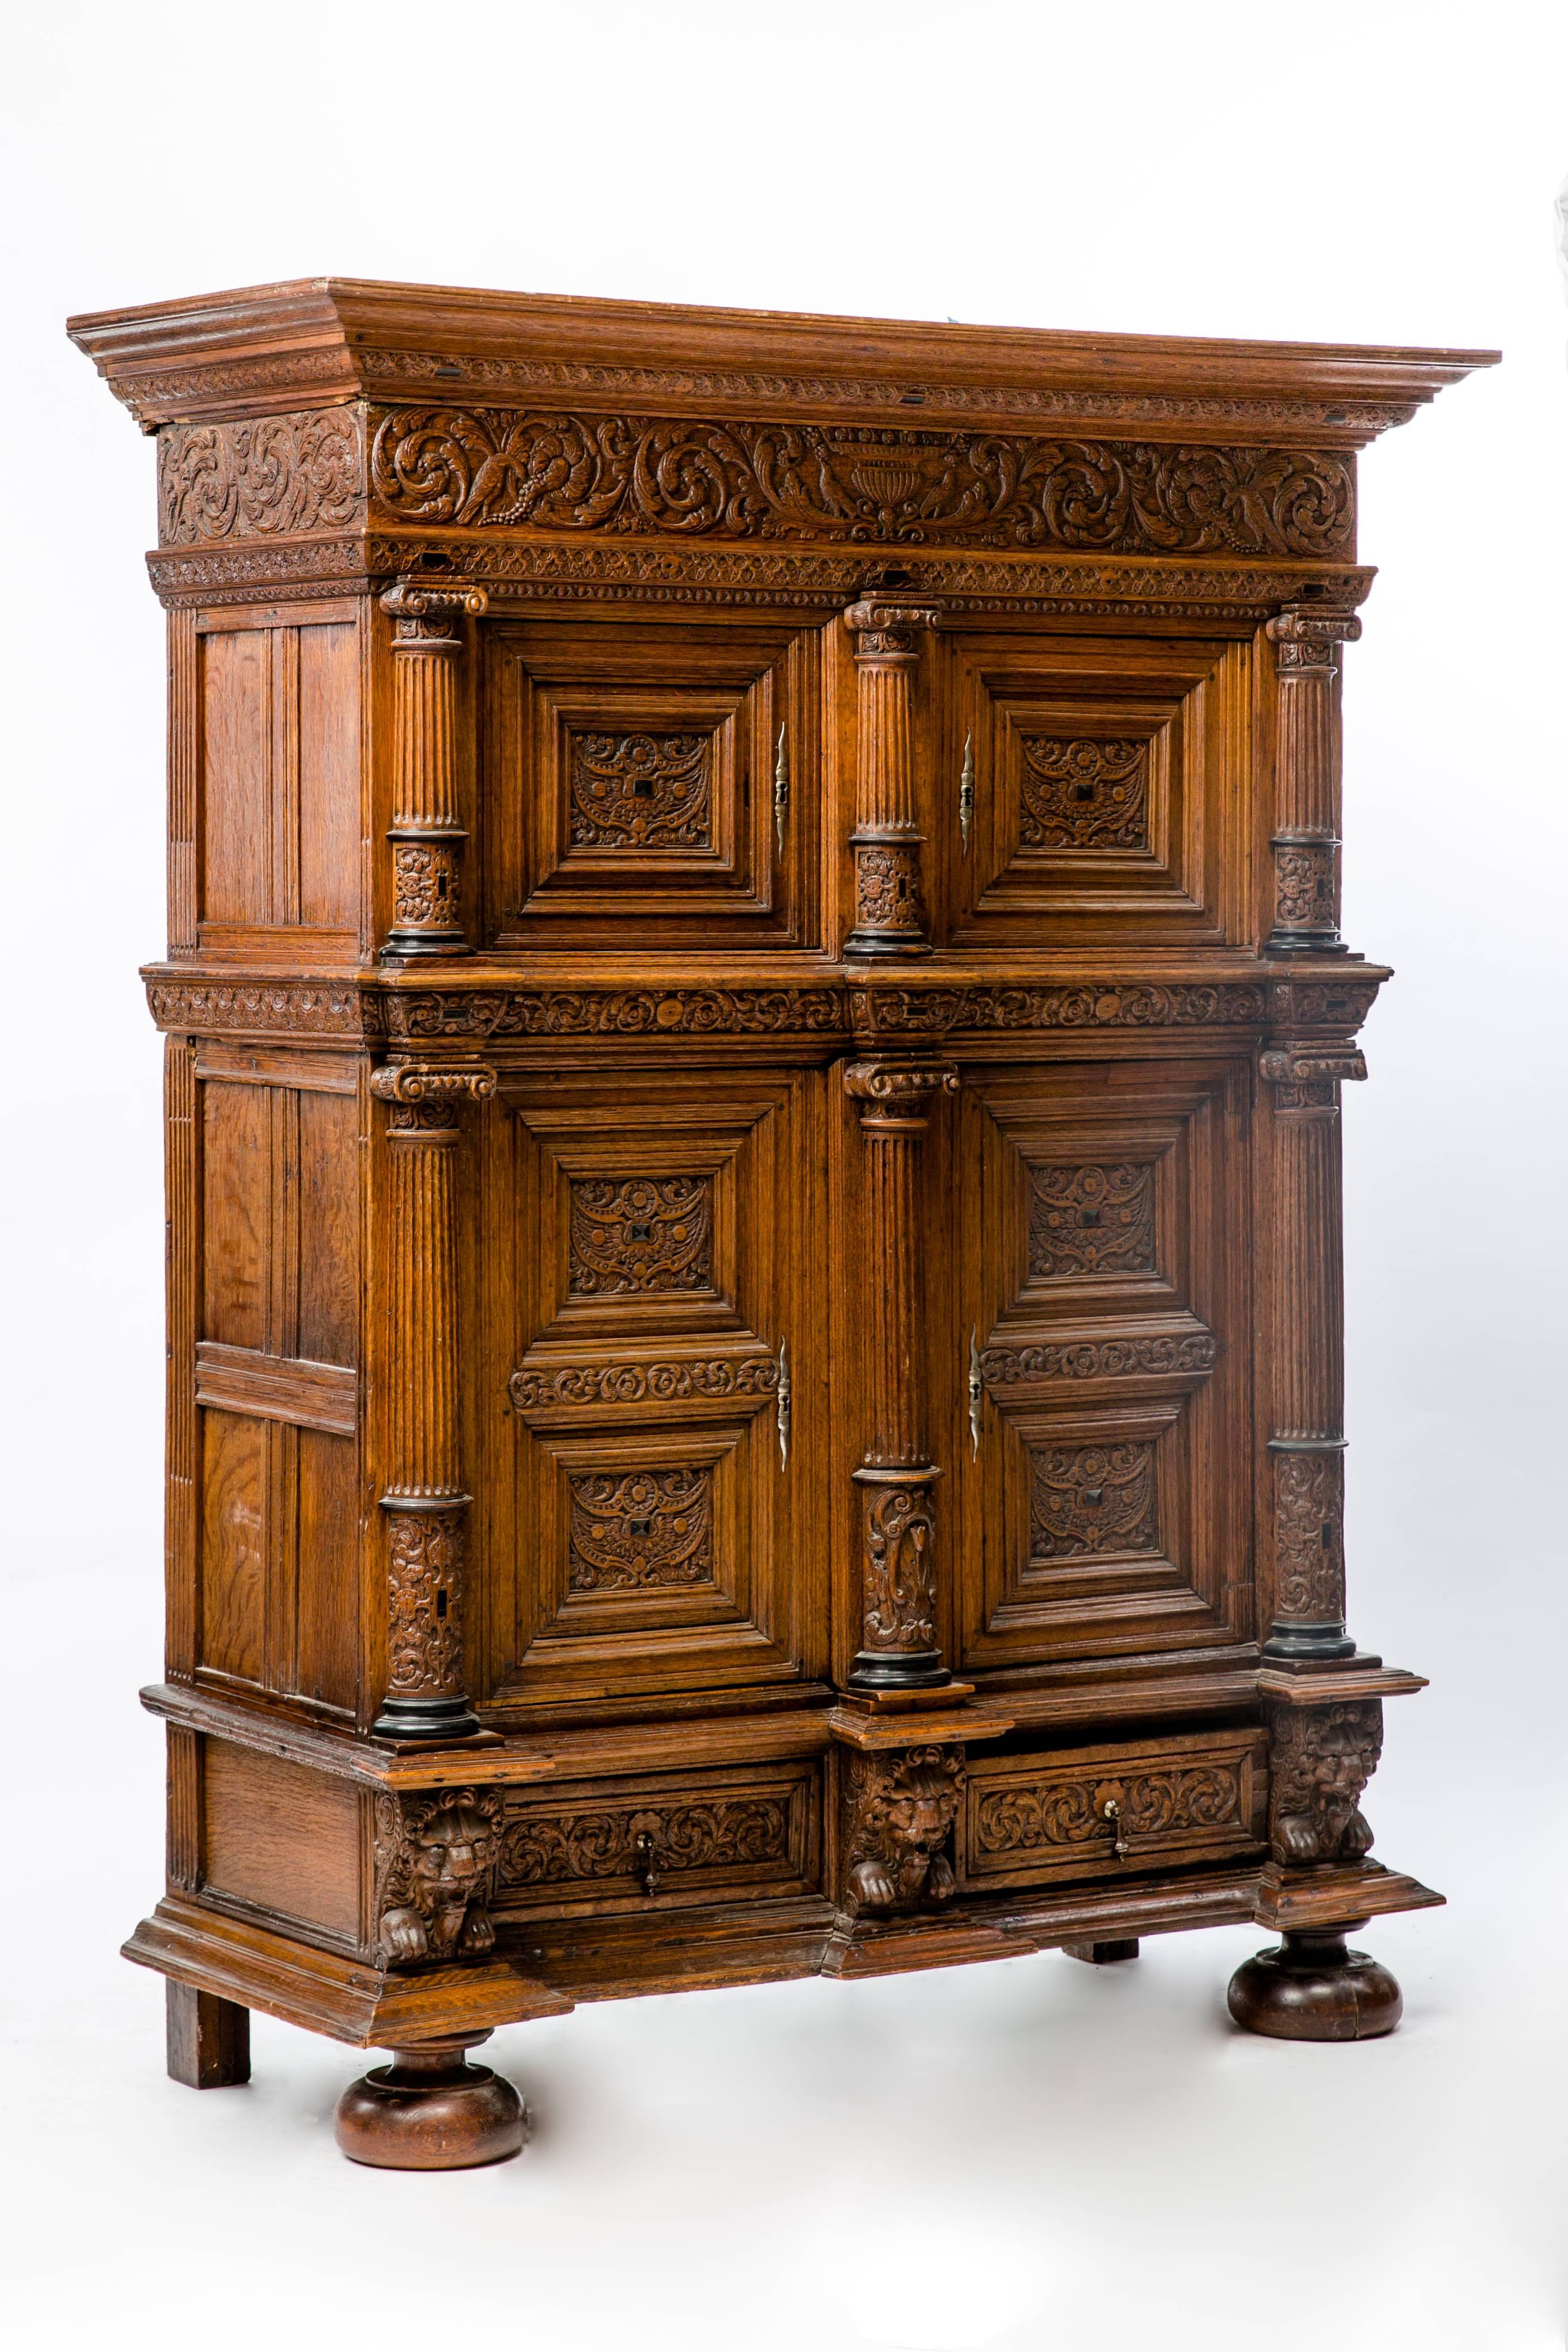 A 17th century oak, rosewood and ebonized cupboard with rectangular cornice moulding above a frieze drawer carved with overlapping roundels, flanked and divided by grotesques masks above a pair of paneled doors. These raised doors enclose a plain